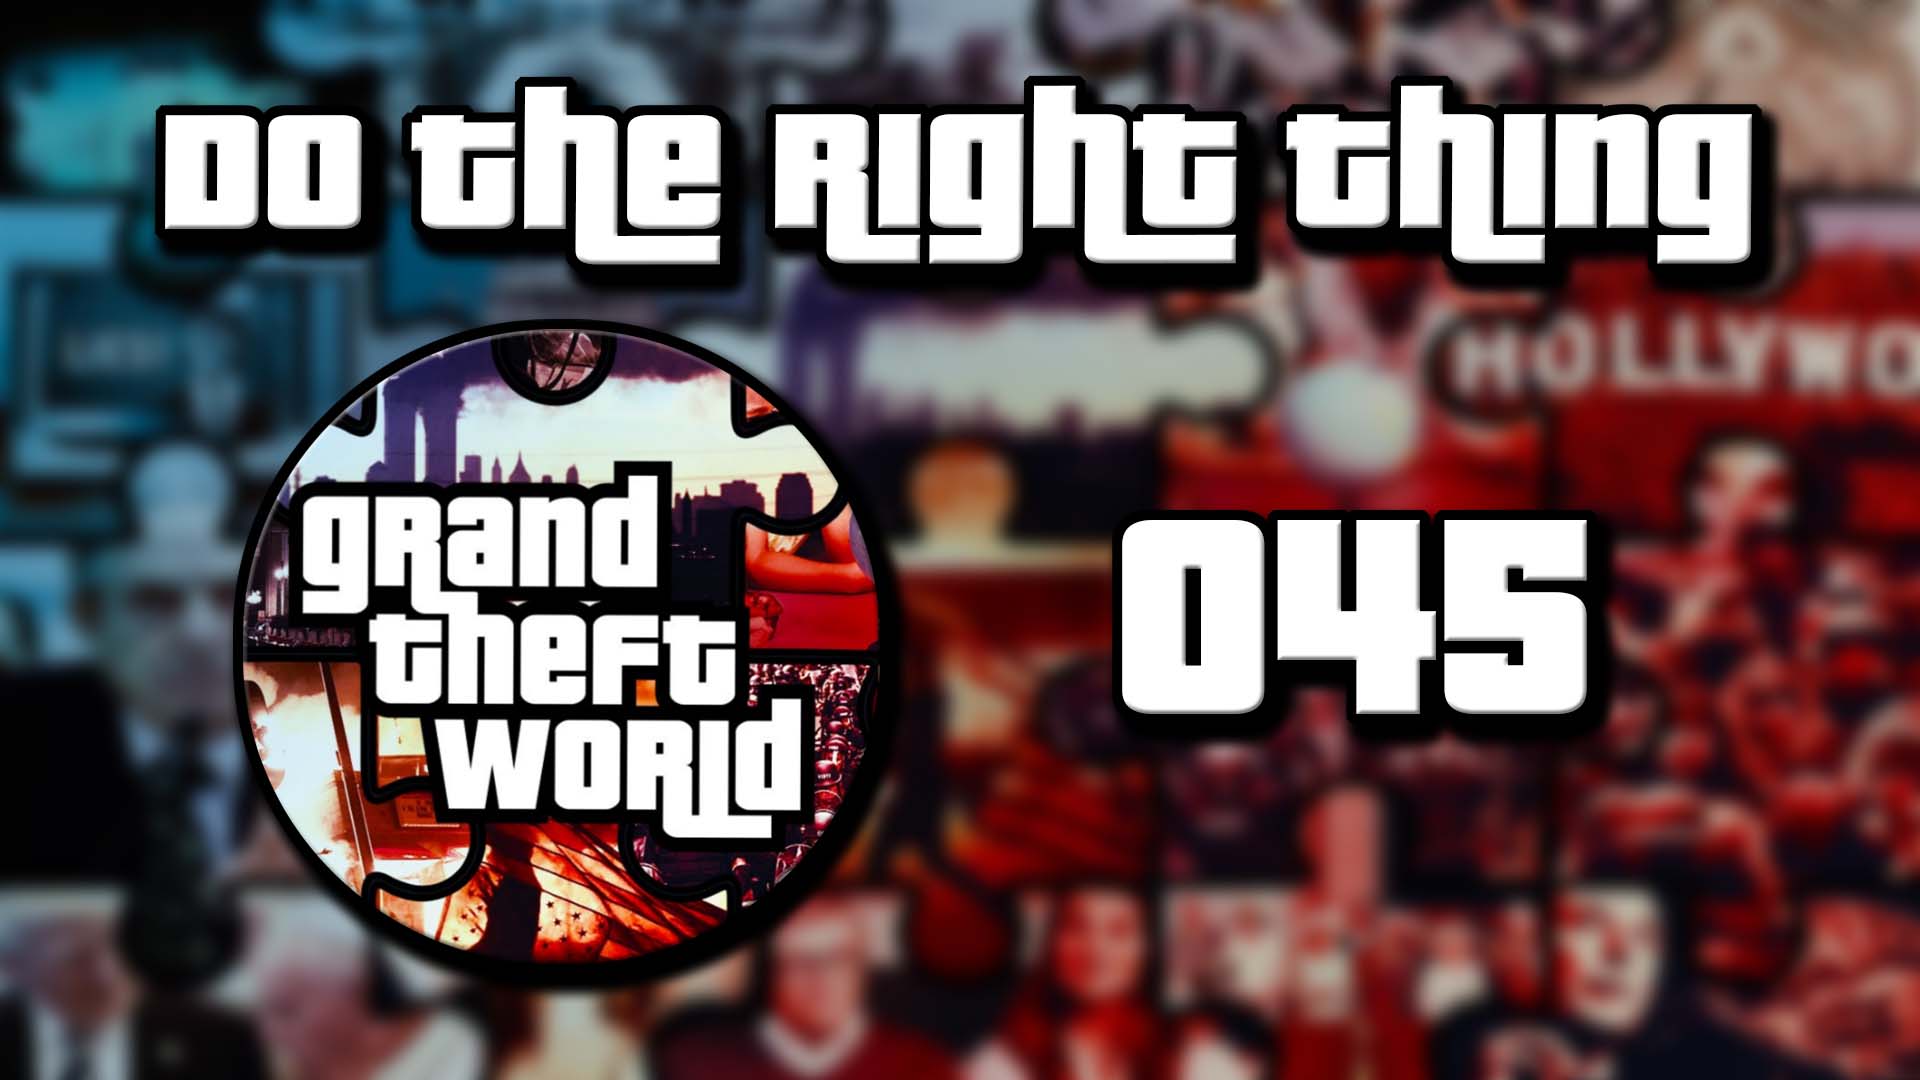 Grand Theft World Podcast 045 | Do the Right Thing